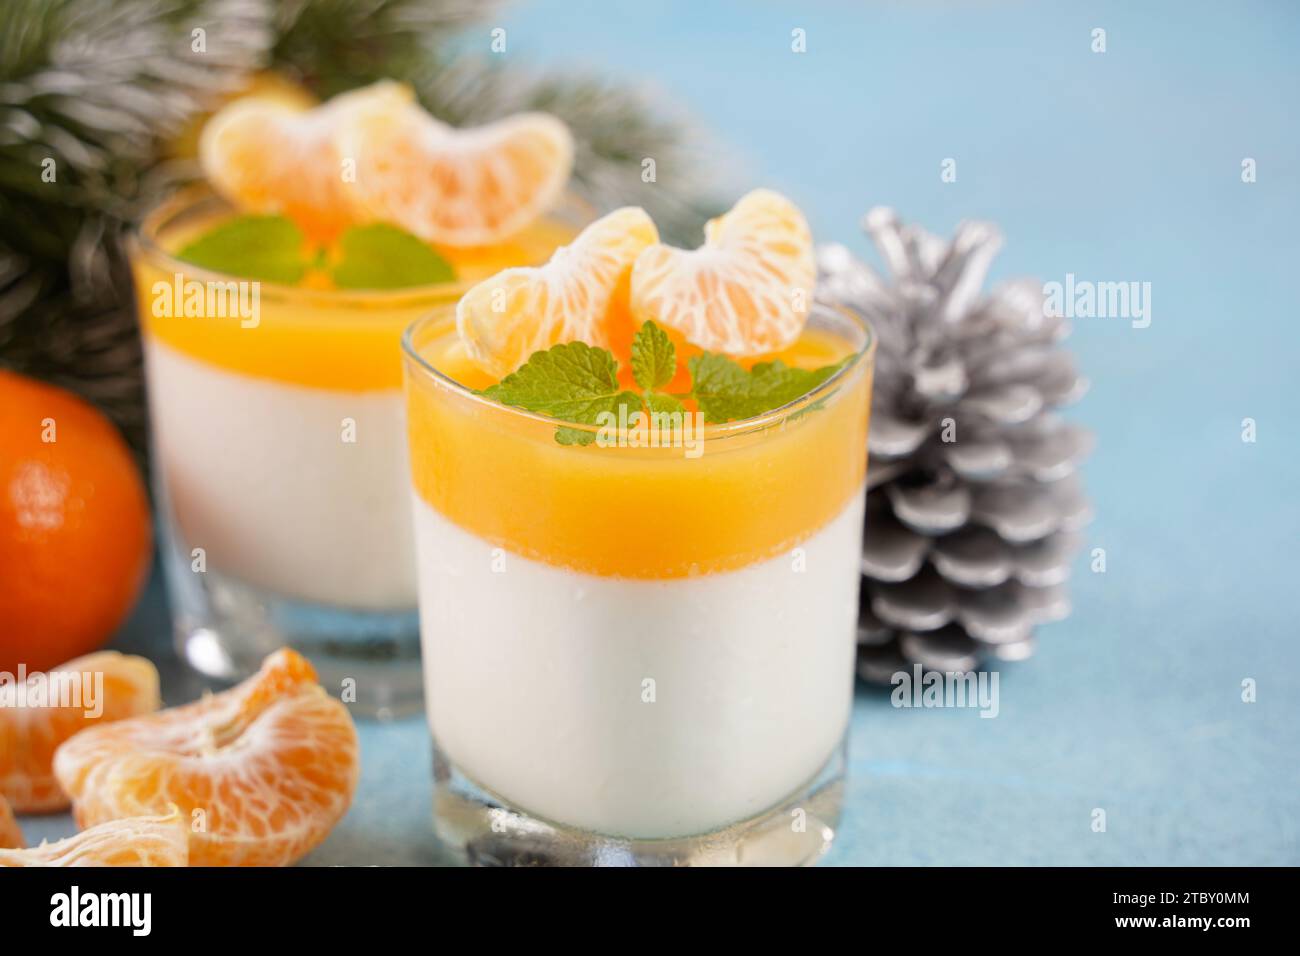 Panna cotta with tangerines jelly and mint, Italian dessert, homemade cuisine. On the background are branches of a green Christmas tree. Stock Photo